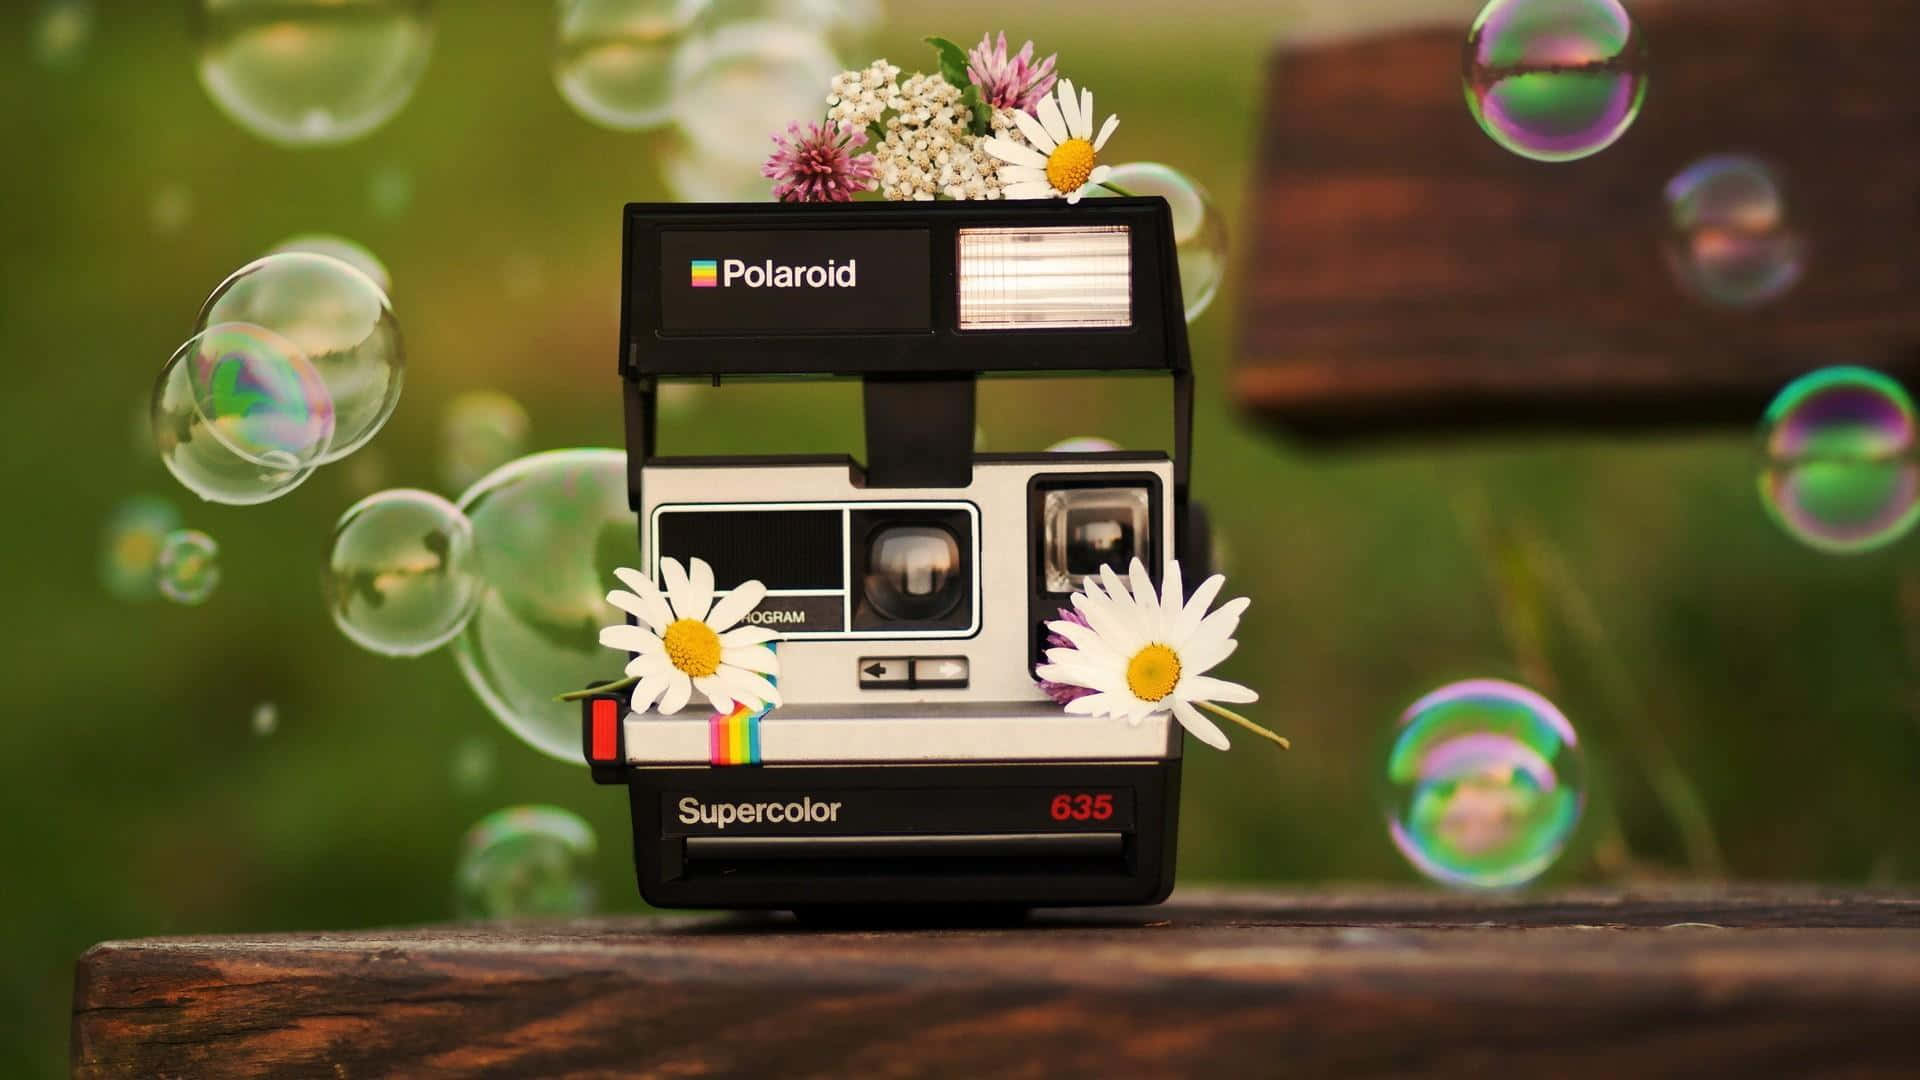 Polaroid Camera With Flowers And Bubbles On A Bench